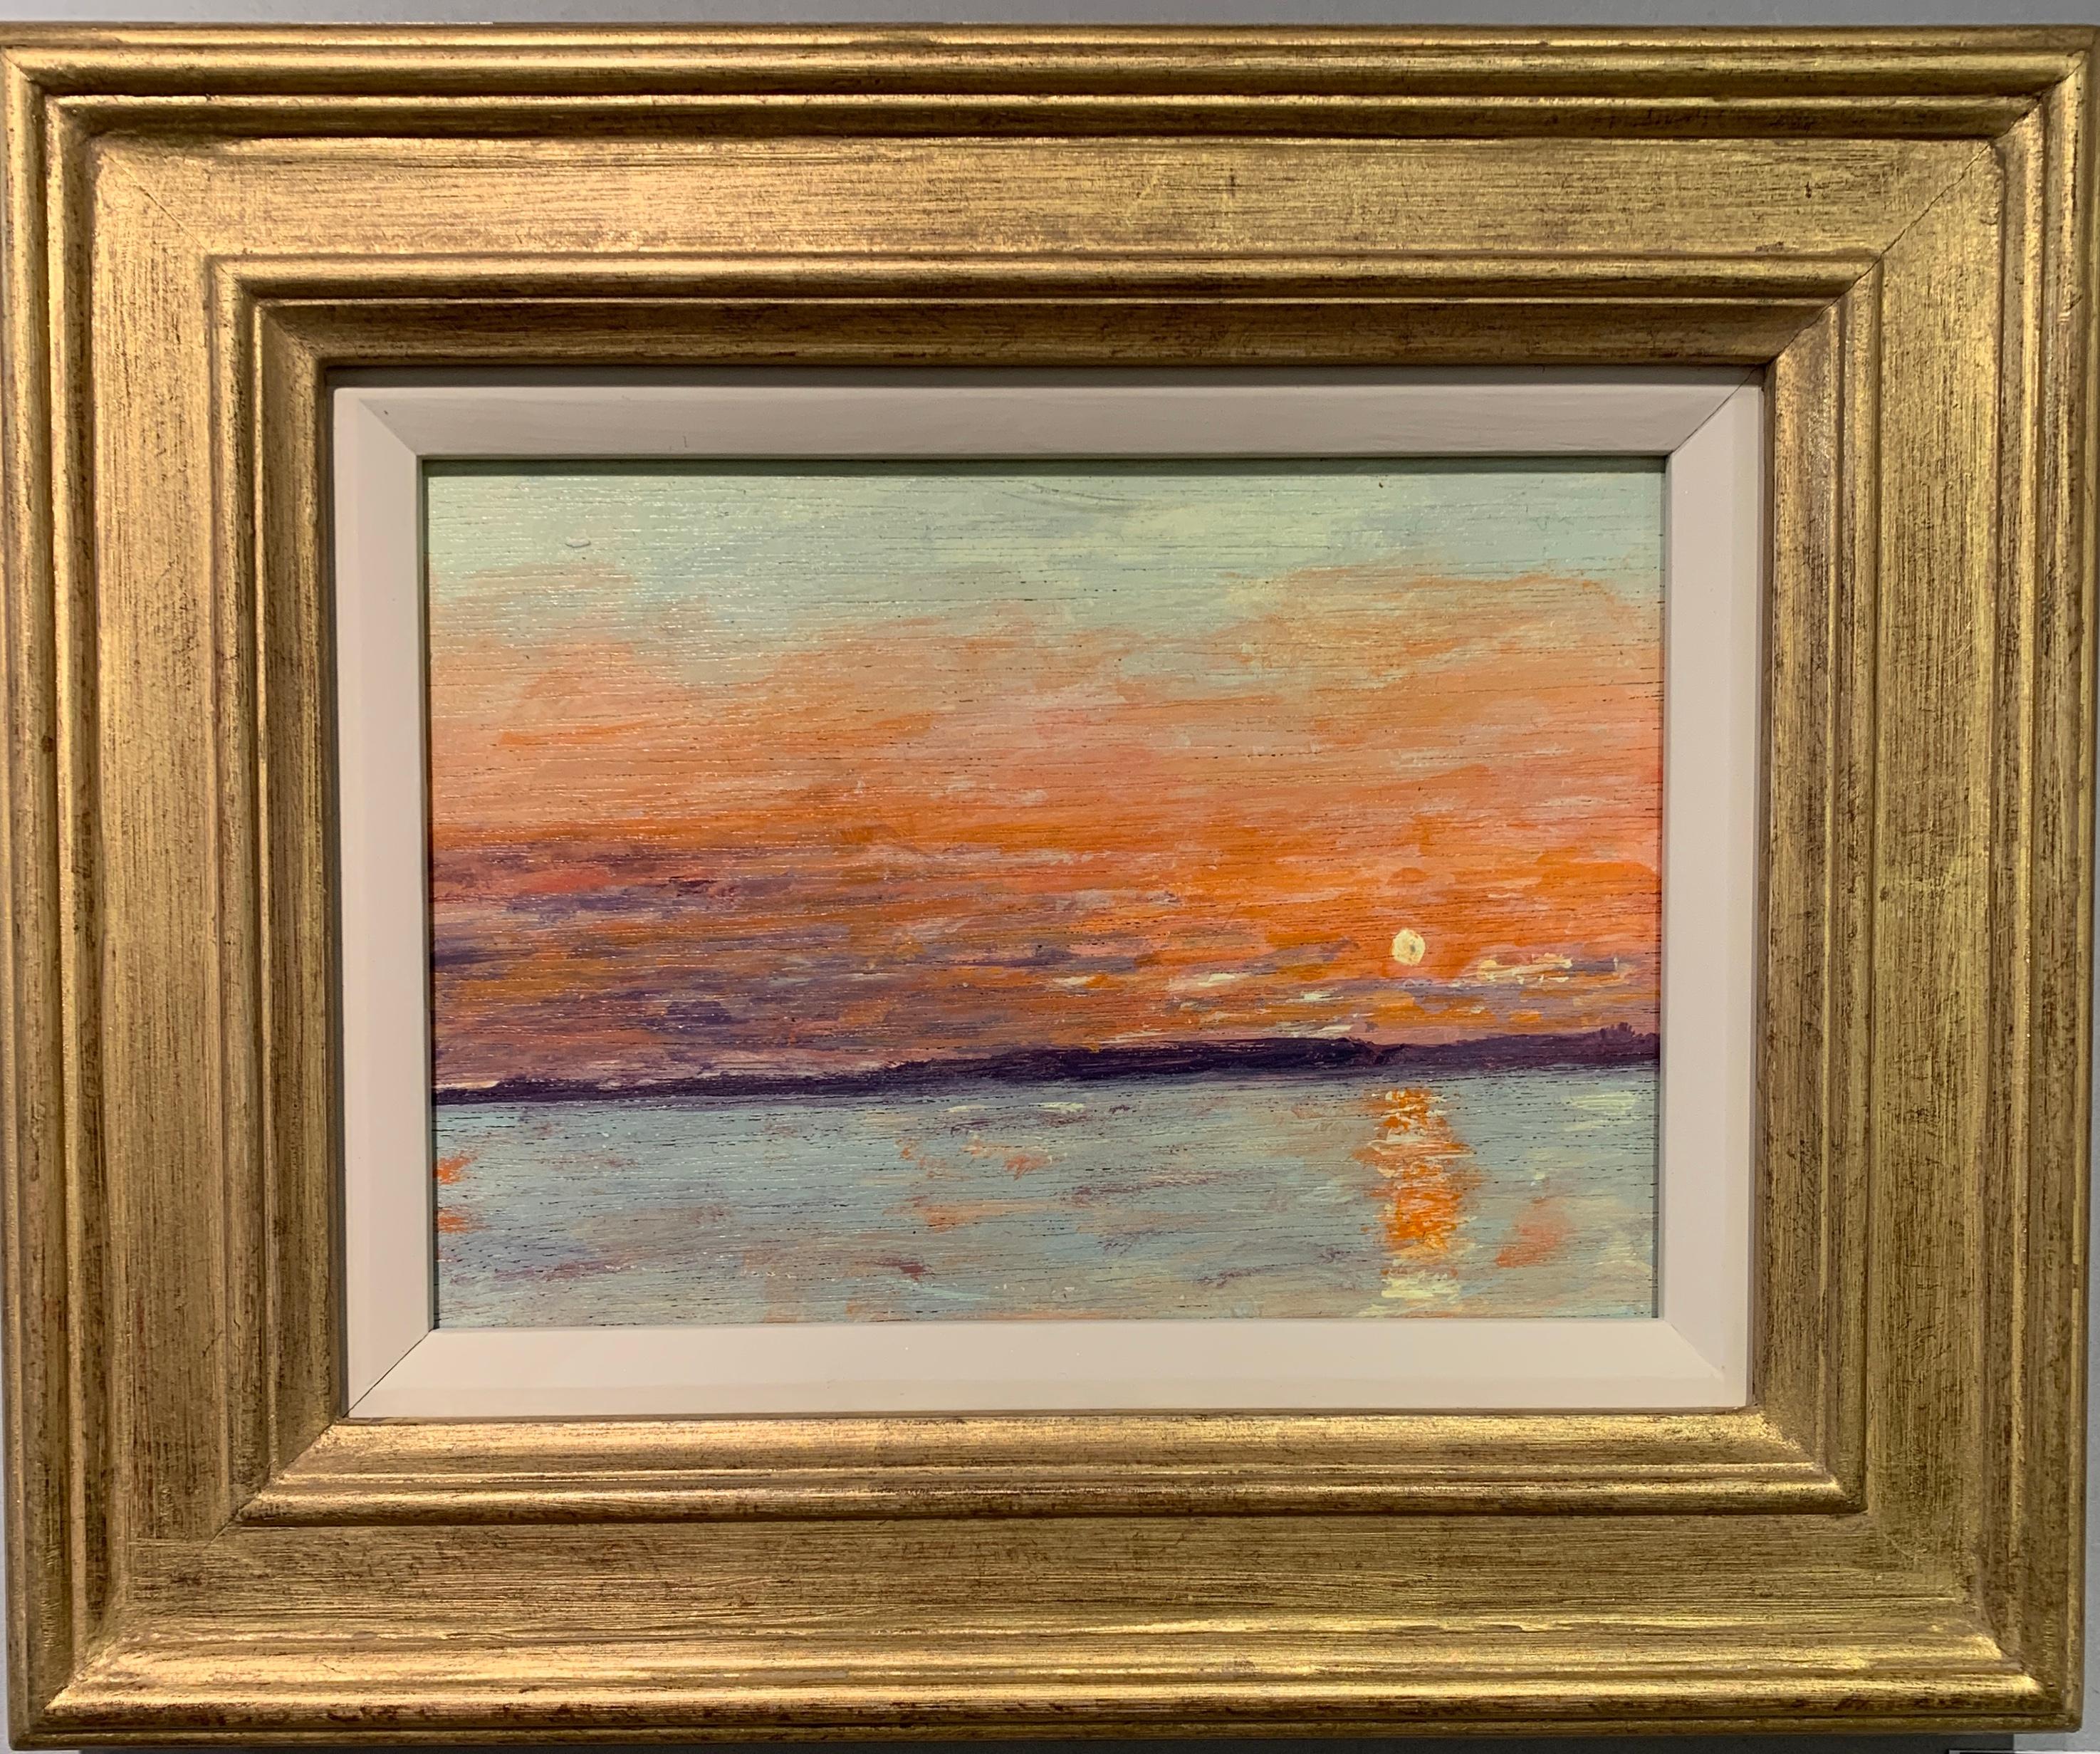 Charles Bertie Hall Landscape Painting - American Impressionist Setting Sun over the Ocean off the coast of Nantucket